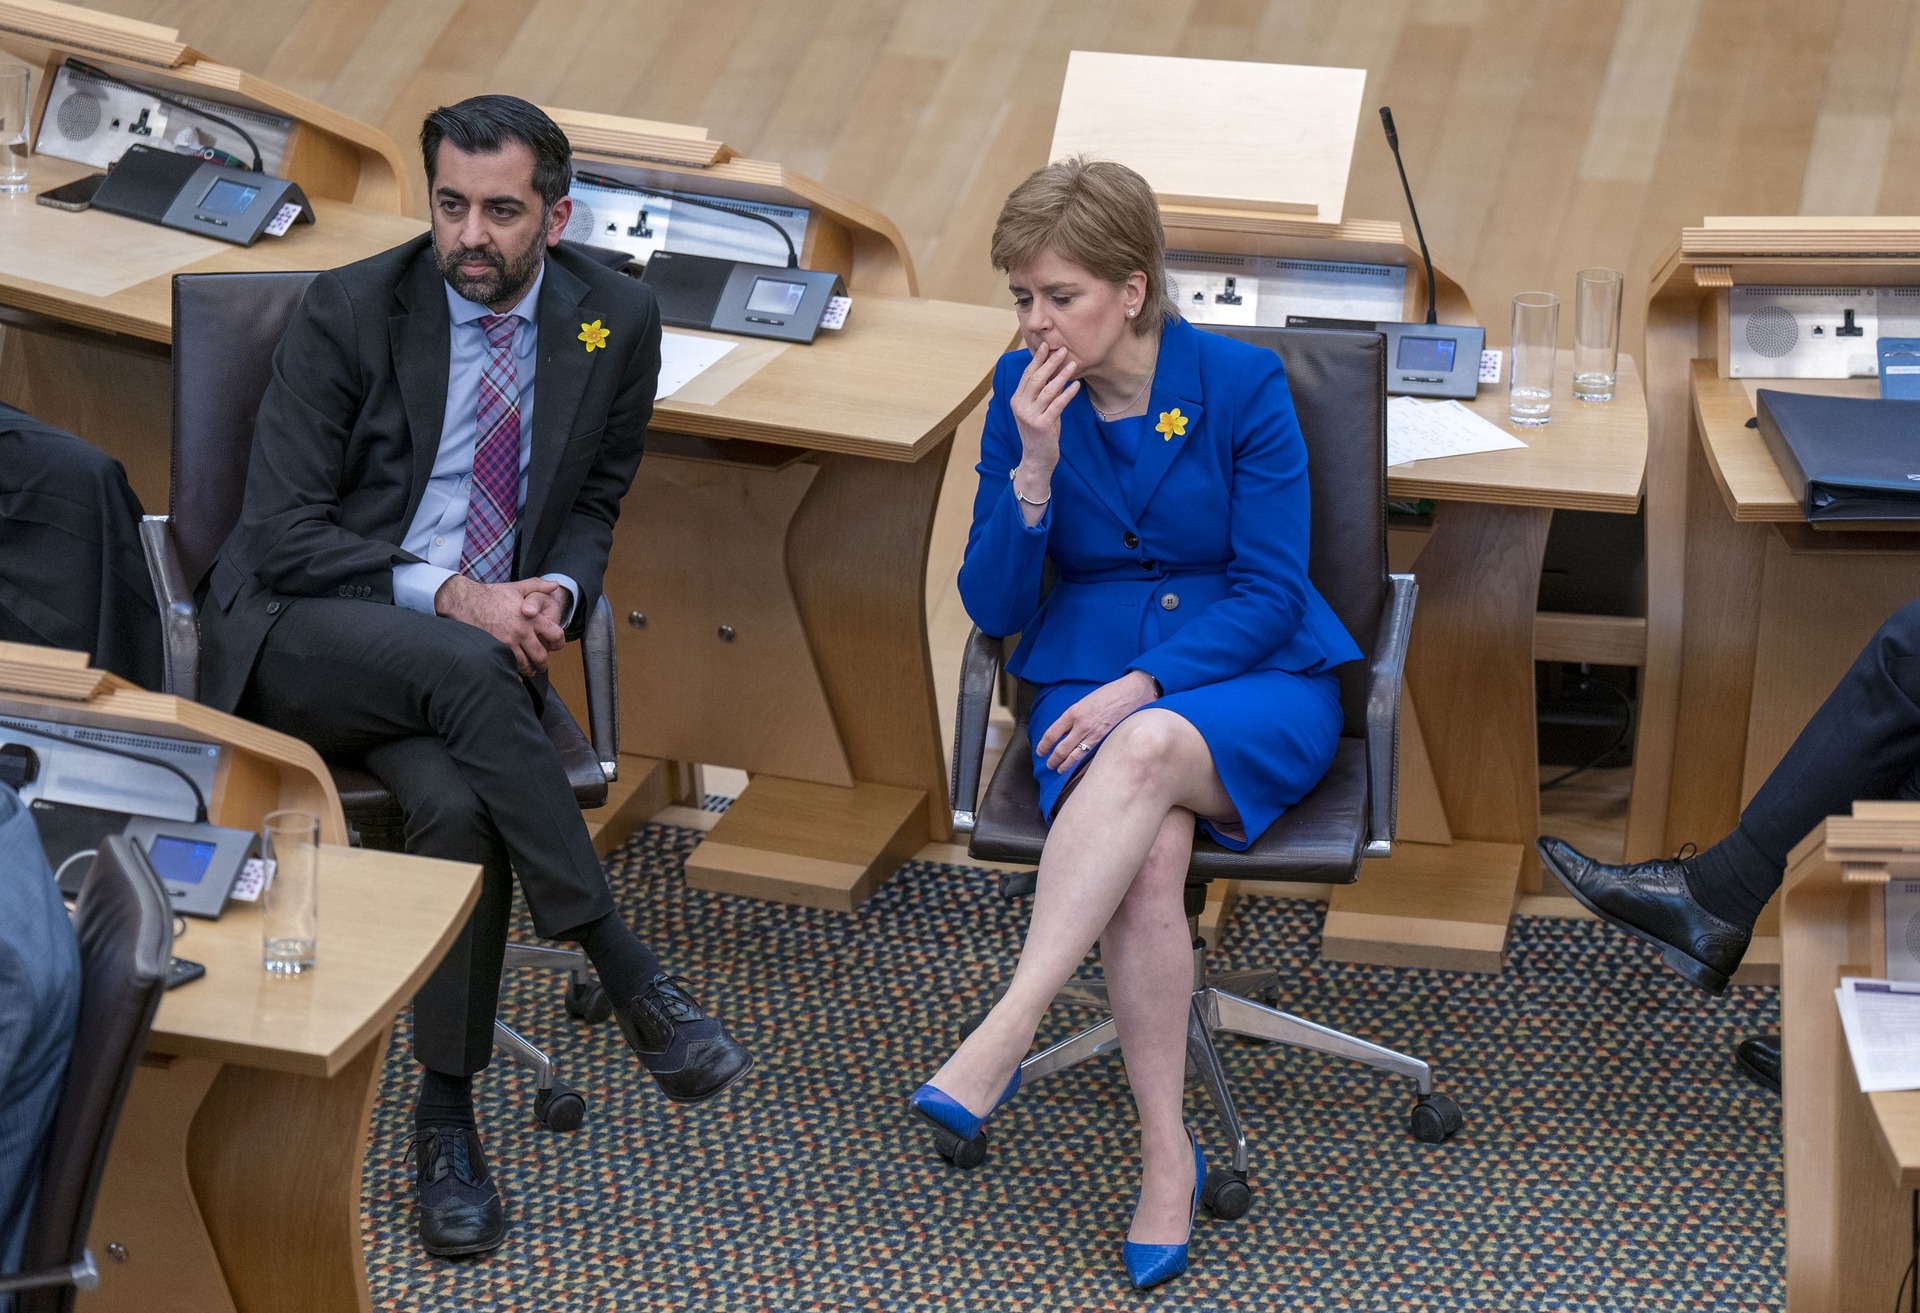 Humza Yousaf said he had not spoken to his predecessor Nicola Sturgeon since her husband was arrested by police investigating SNP finances.